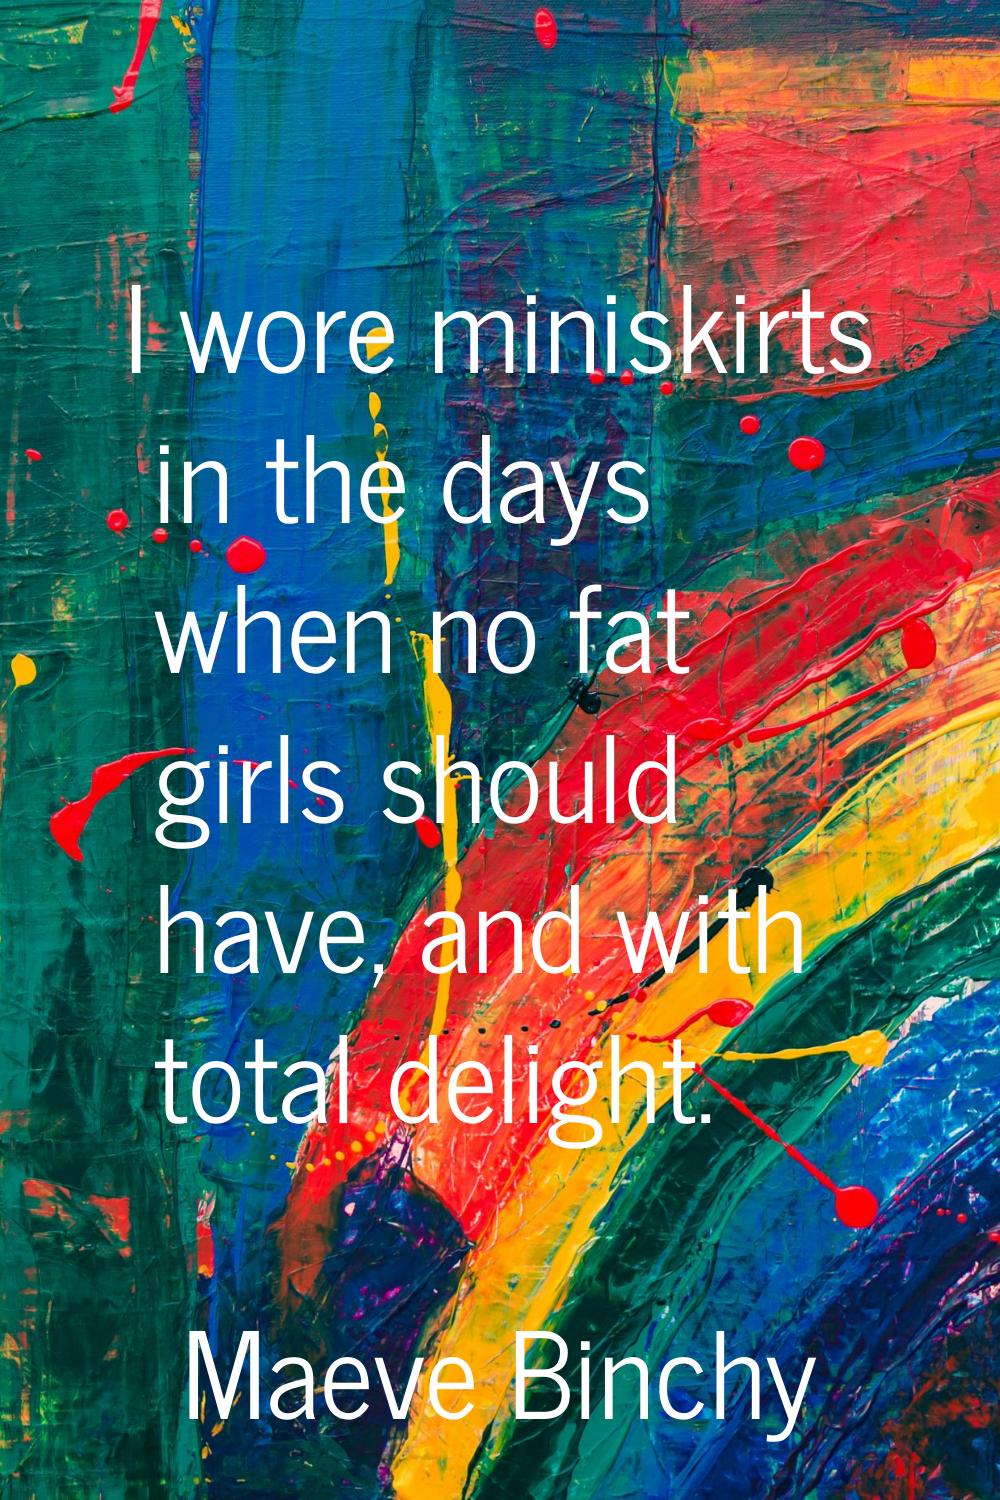 I wore miniskirts in the days when no fat girls should have, and with total delight.